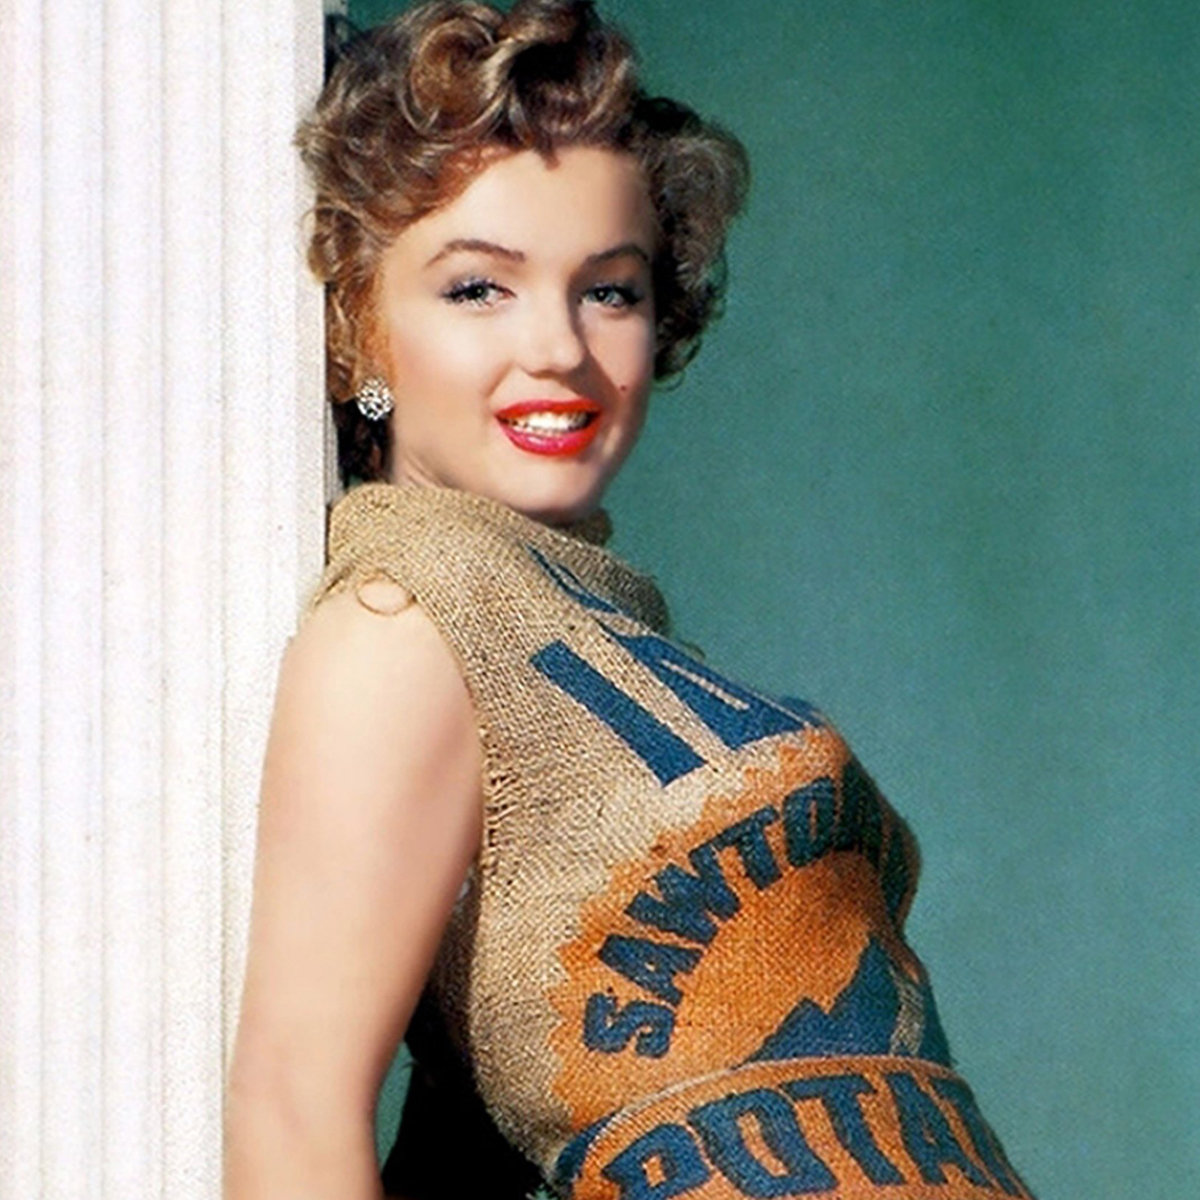 The Story Behind Marilyn Monroe's Infamous Happy Birthday Dress